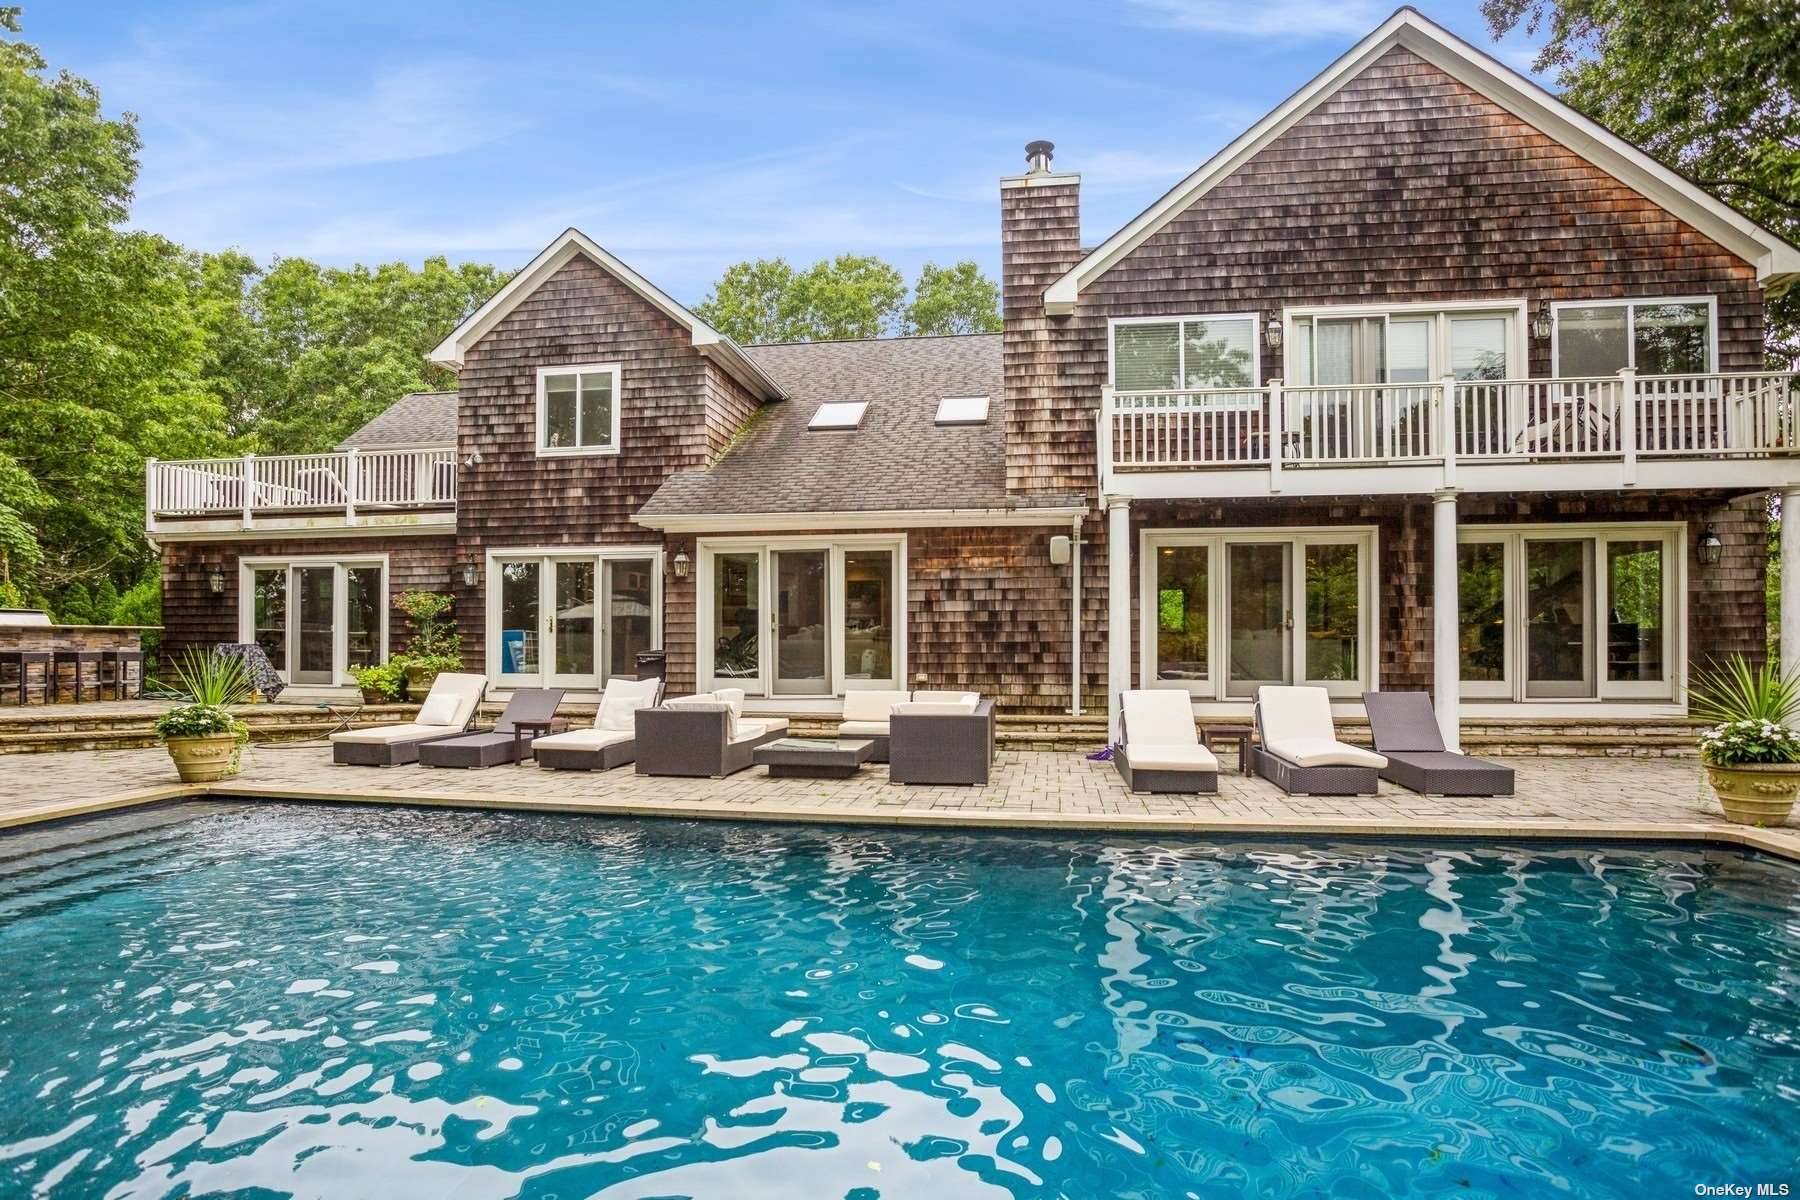 Set on two bucolic acres in Quogue adjoining a 6.